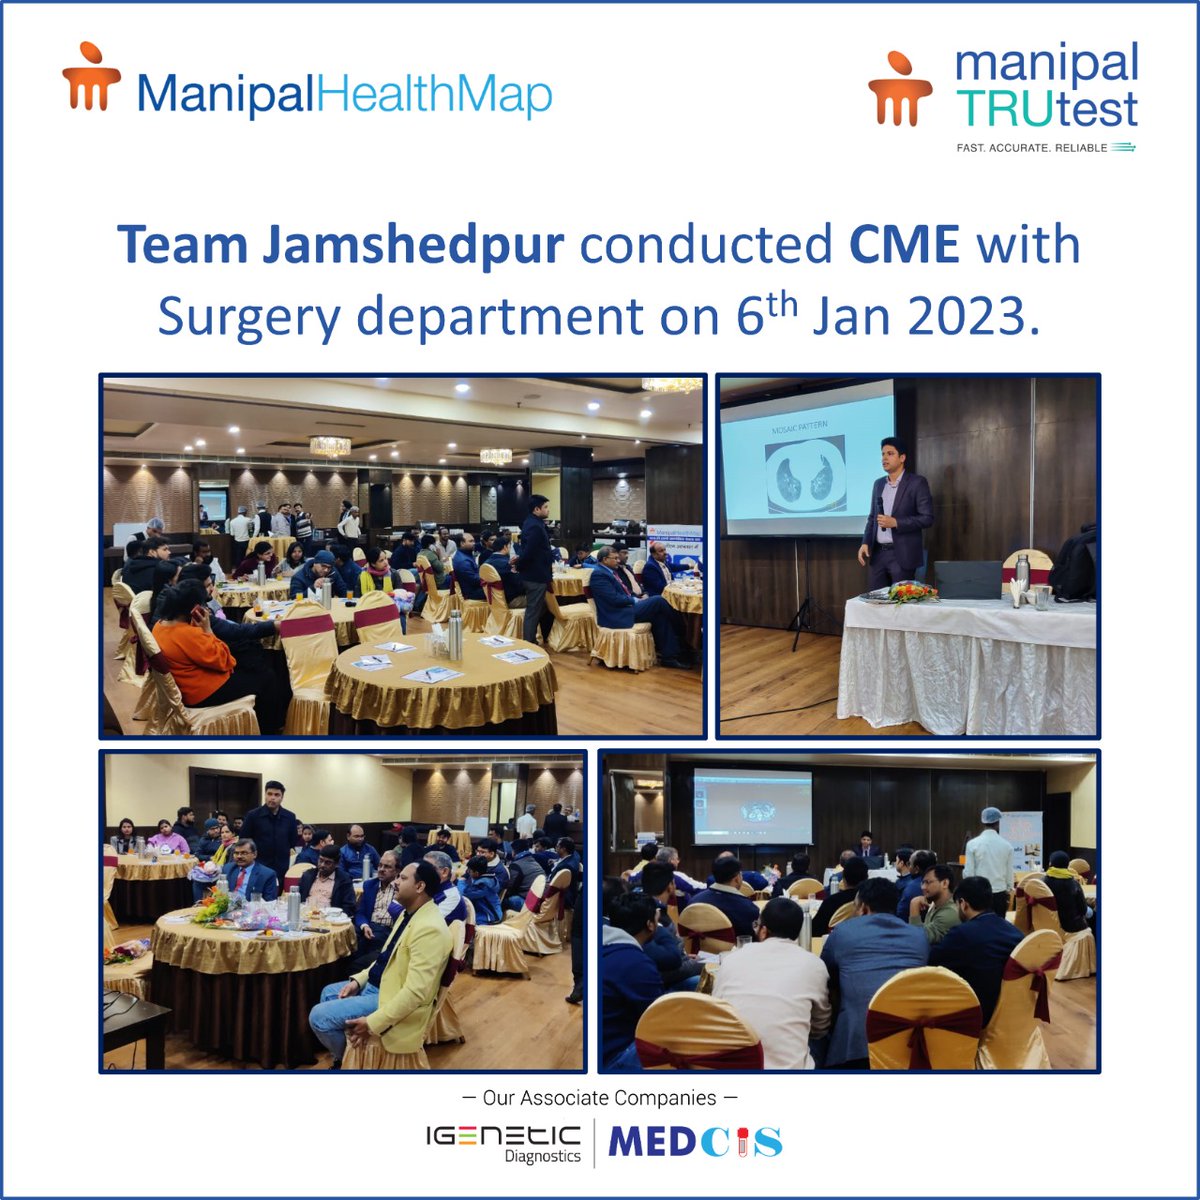 On the 6th of January, MGM Hospital in Jamshedpur held a #ContinuingMedicalEducation seminar which esteemed members from the #SurgeryDepartment attended. #CTScan clinical cases presented by centre Radiologist Dr Vishnu Dutt Gautam.

#ManipalTRUtest #Radiology #Jamshedpur #Xray